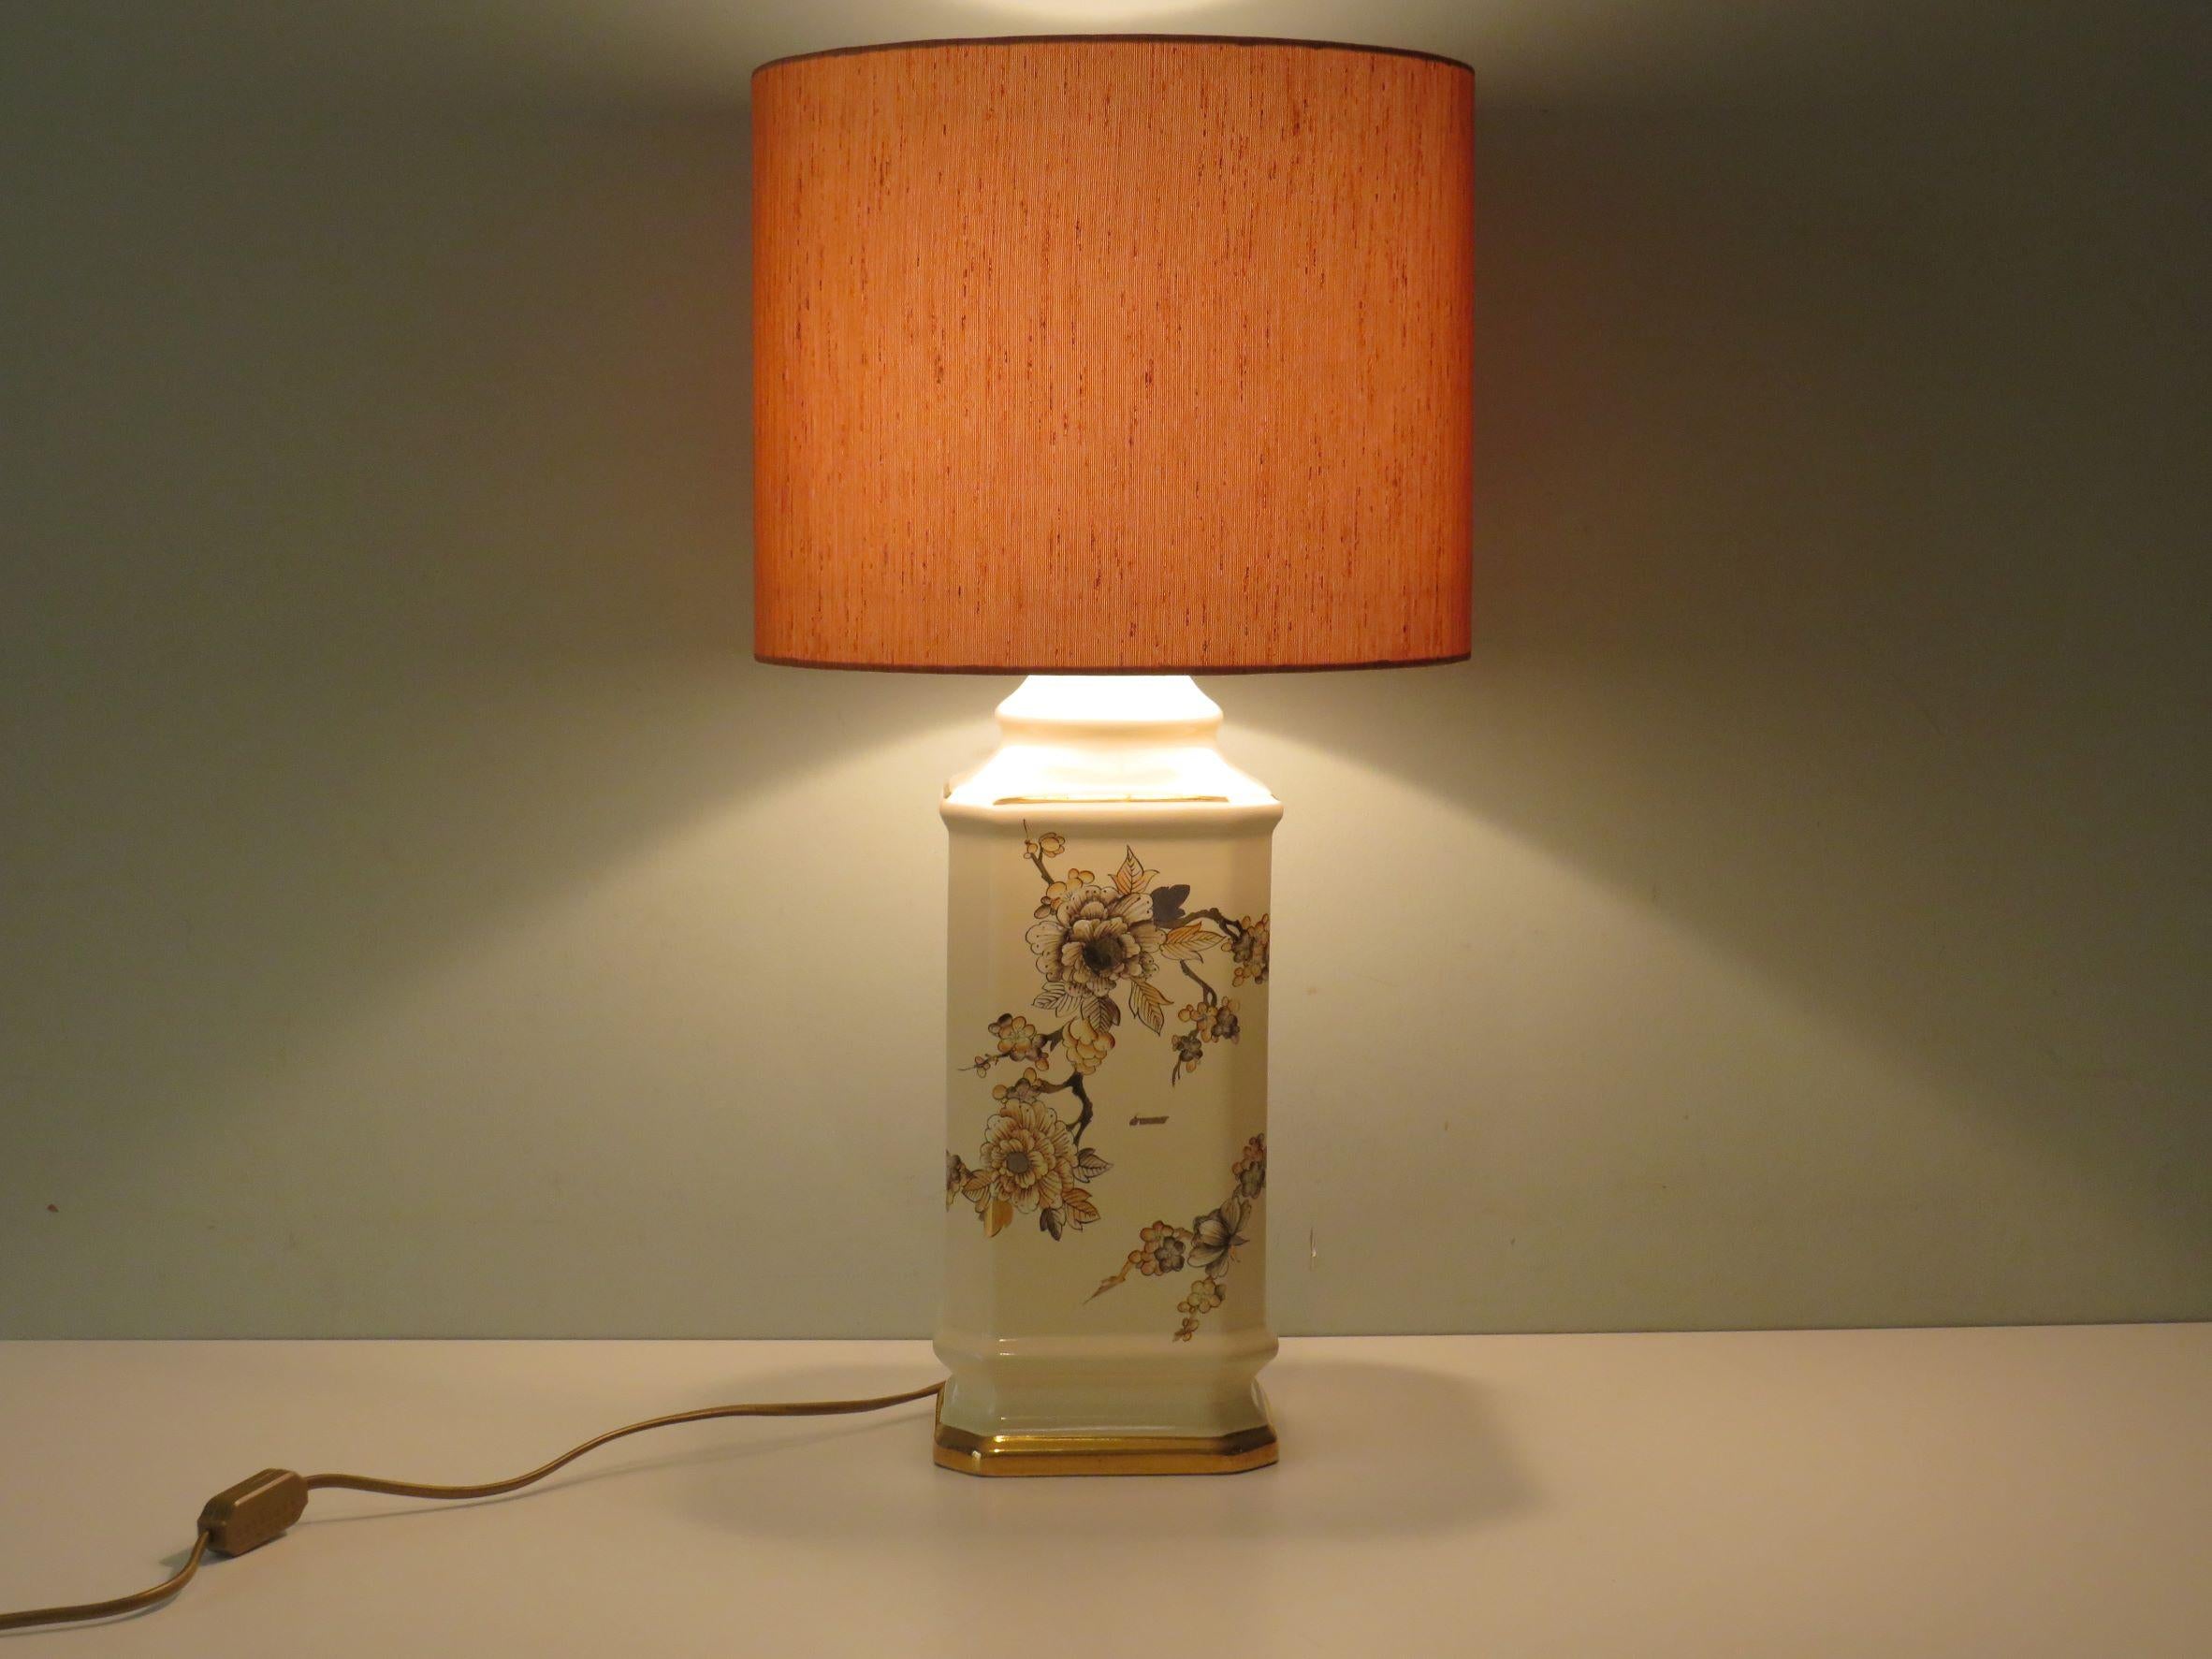 Pagoda-shaped, cream-coloured lamp base with floral pattern in pink and gold-coloured tones. The new, custom made lampshade is made of orange-gold-brown structured fabric. The lamp is equipped with 1 E 27 fitting and a gold-coloured cord with a